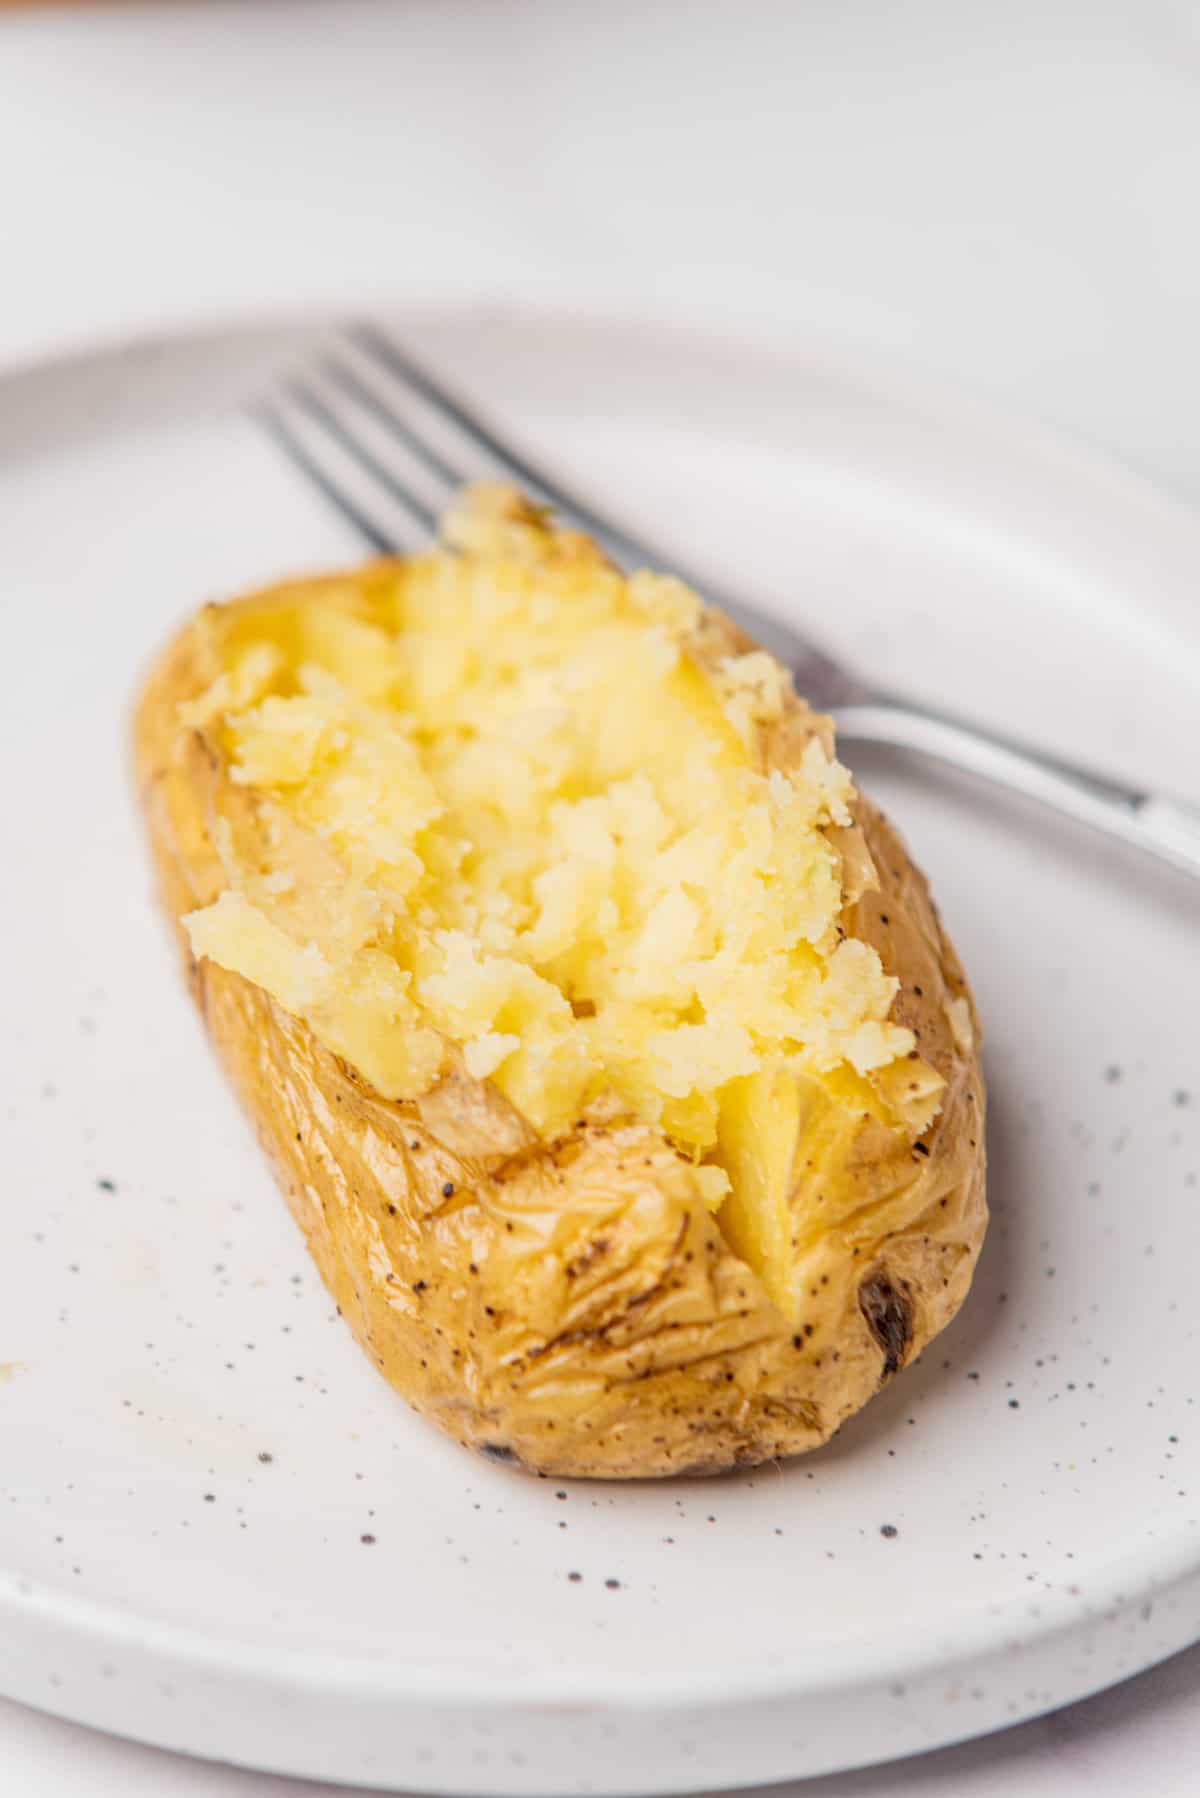 An image of microwave baked potato with a fark behind it